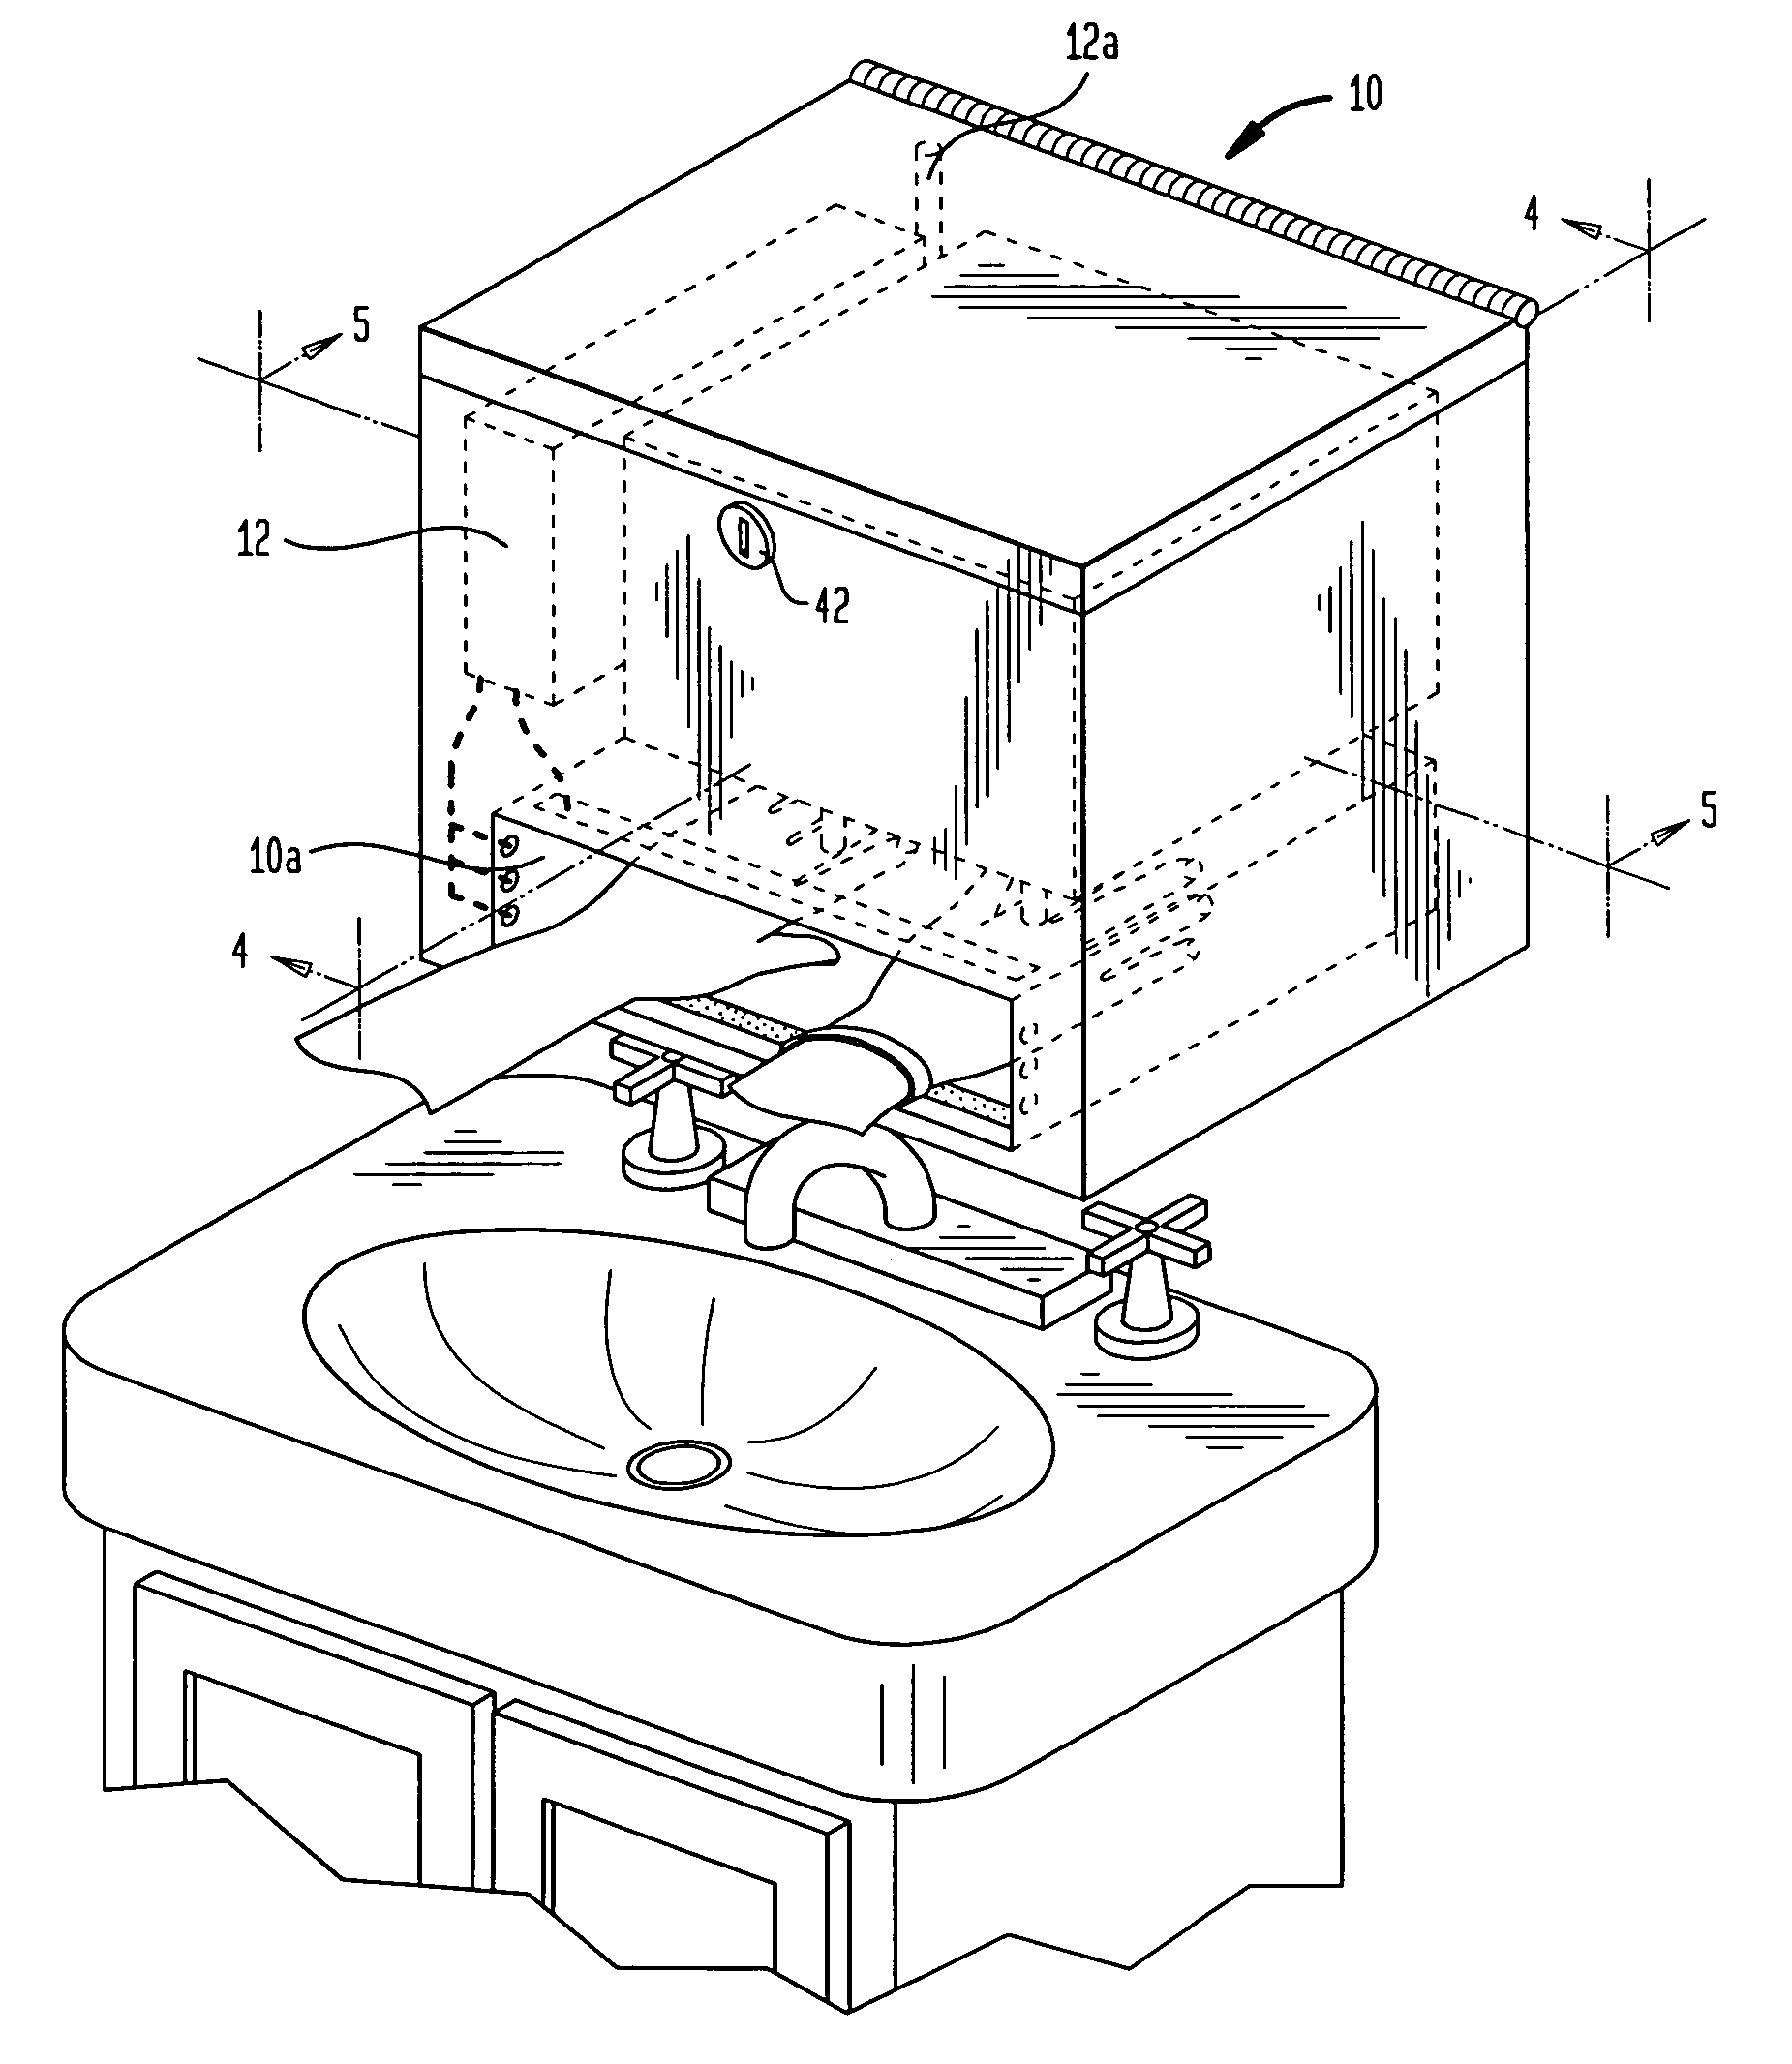 Hand wash monitoring system and method